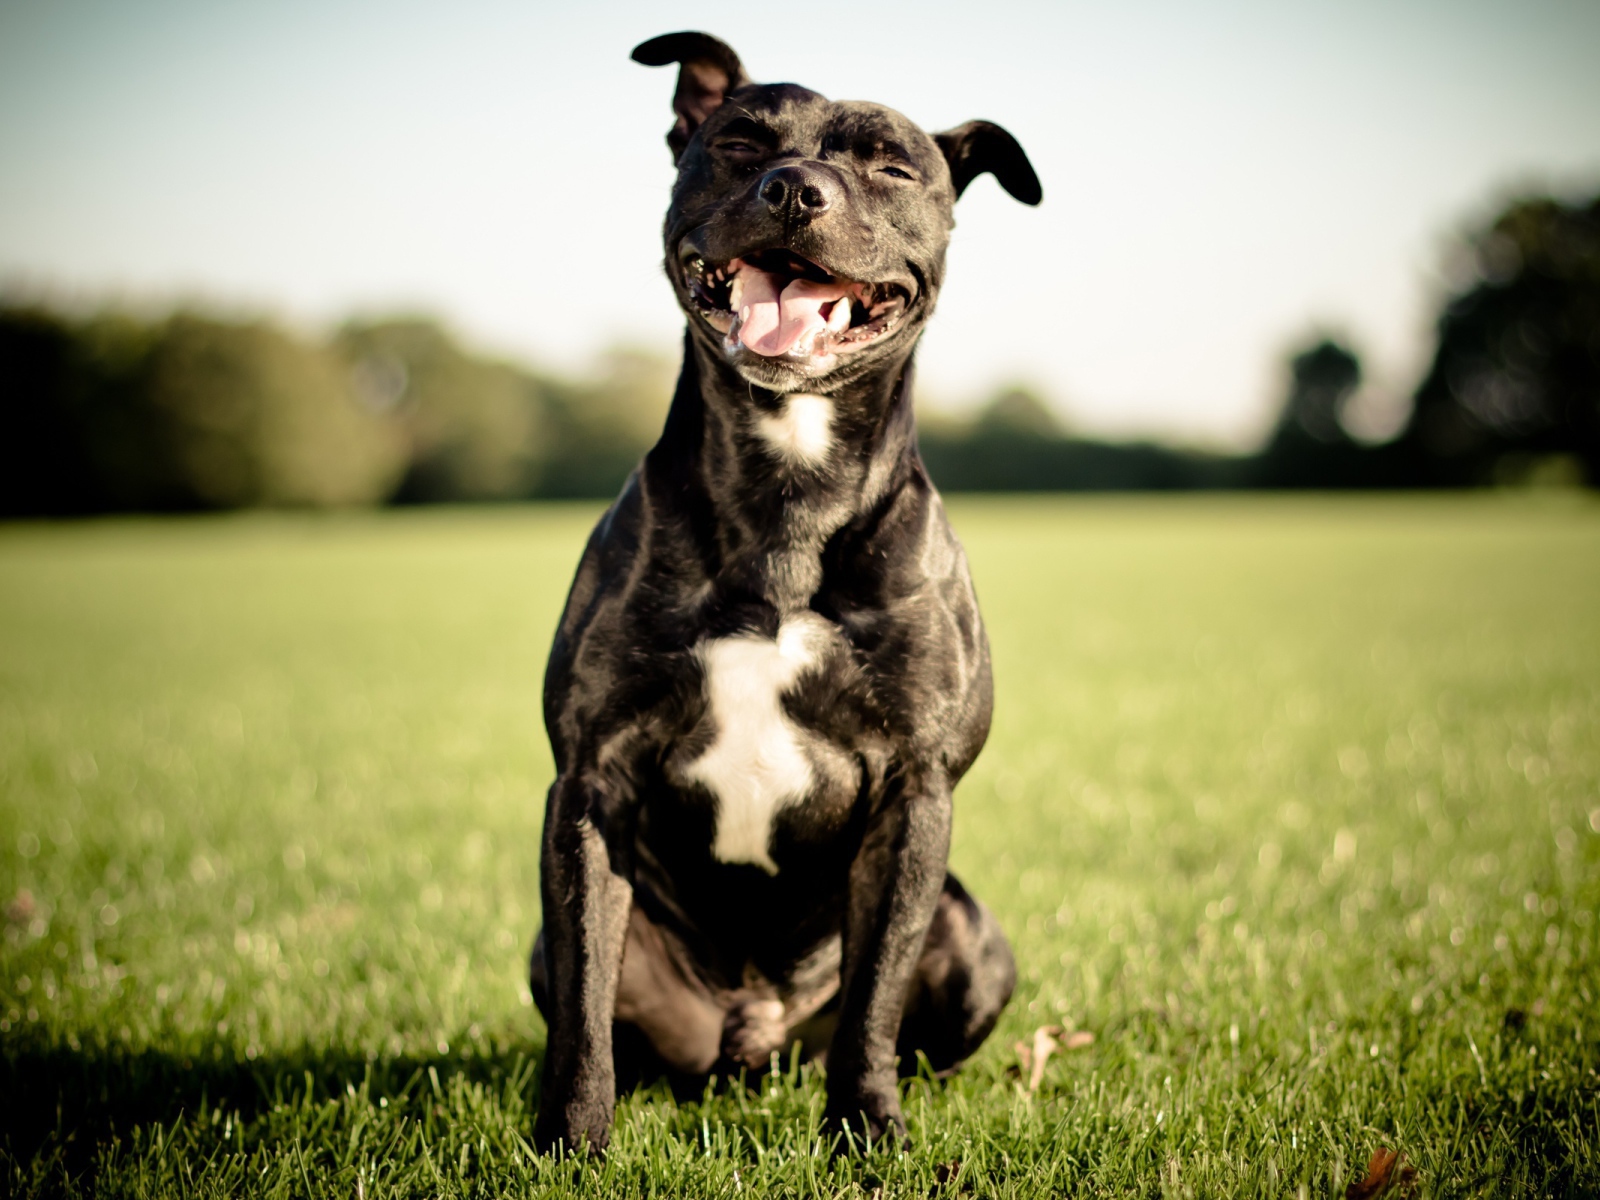 The Beautiful Staffordshire Bull Terrier is smiling